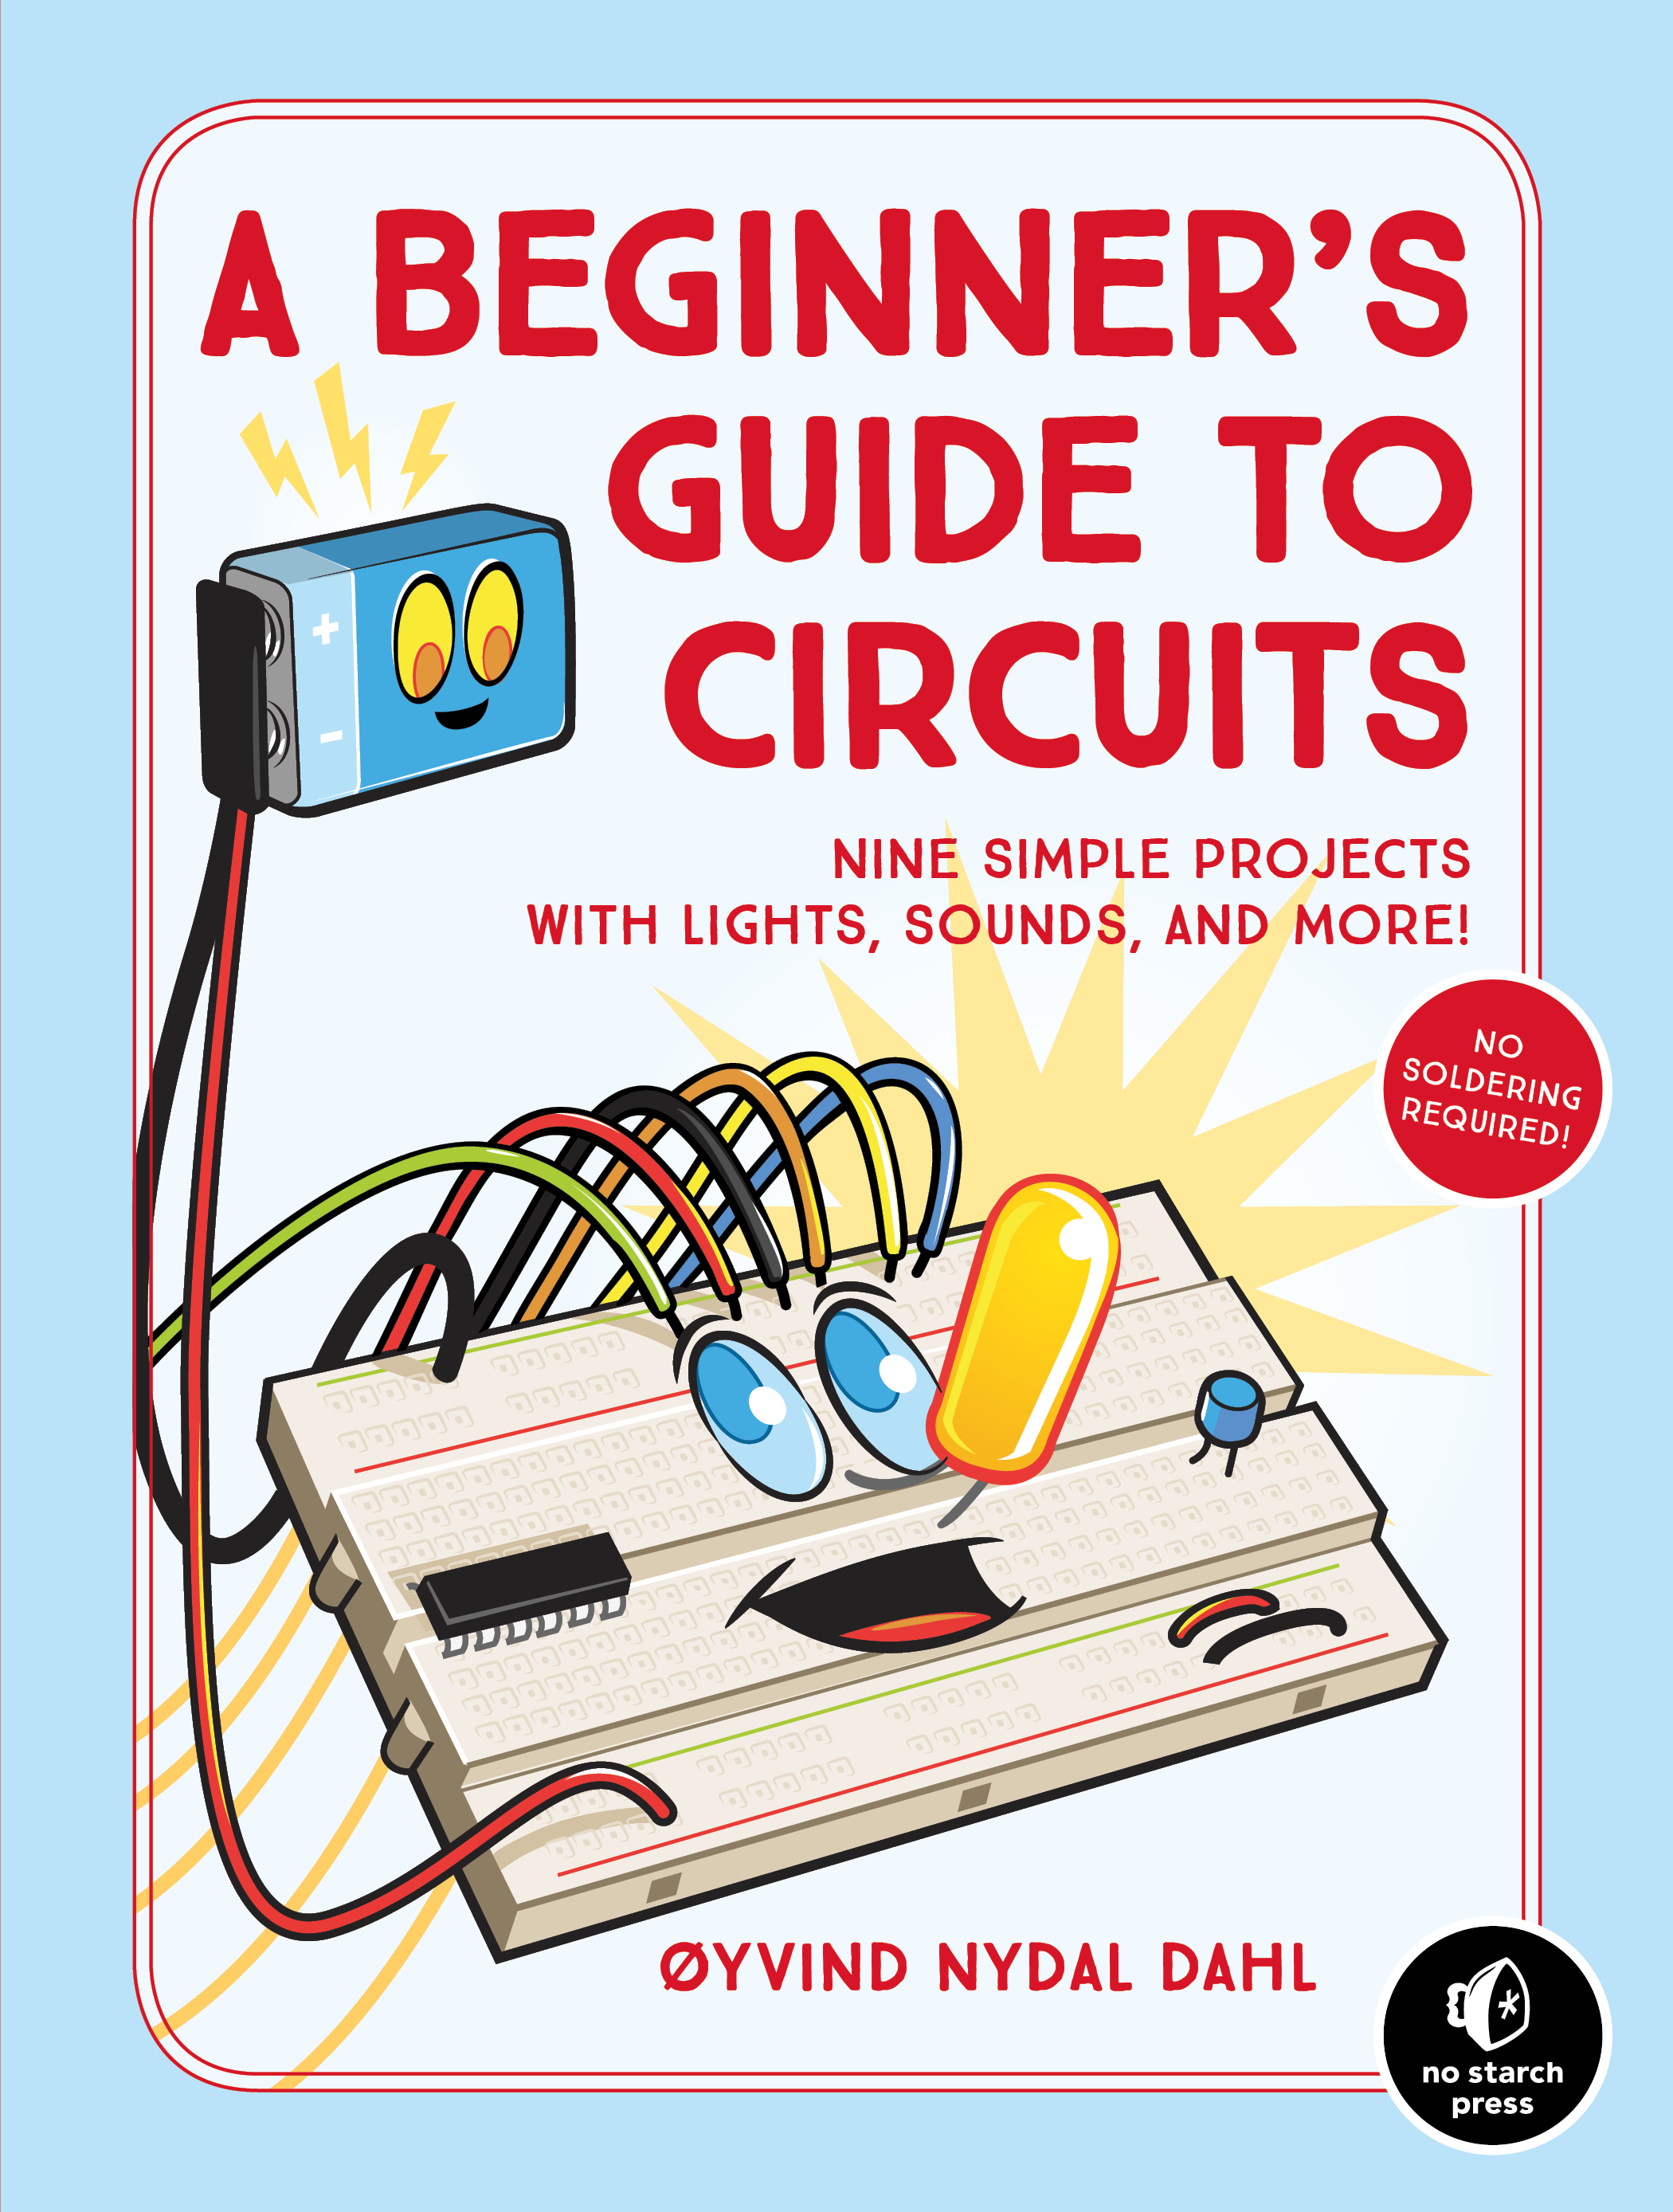 Front cover of "A Beginner’s Guide to Circuits: Nine Simple Projects with Lights, Sounds, and More!" by Øyvind Nydal Dahl. There's a cartoon illustration of a smiling breadboard with a lit-up LED, connected to a smiling 9-Volt battery.